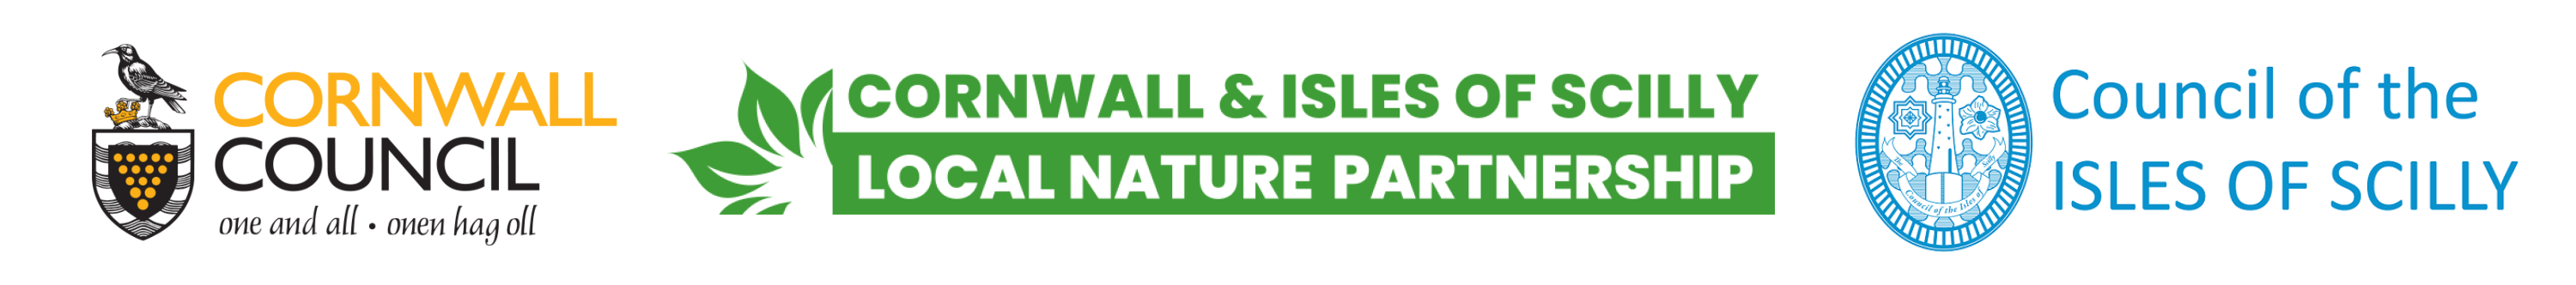 Logos of Cornwall Council, Cornwall and Isles of Scilly Local Nature Partnership and the Council of the Isles of Scilly